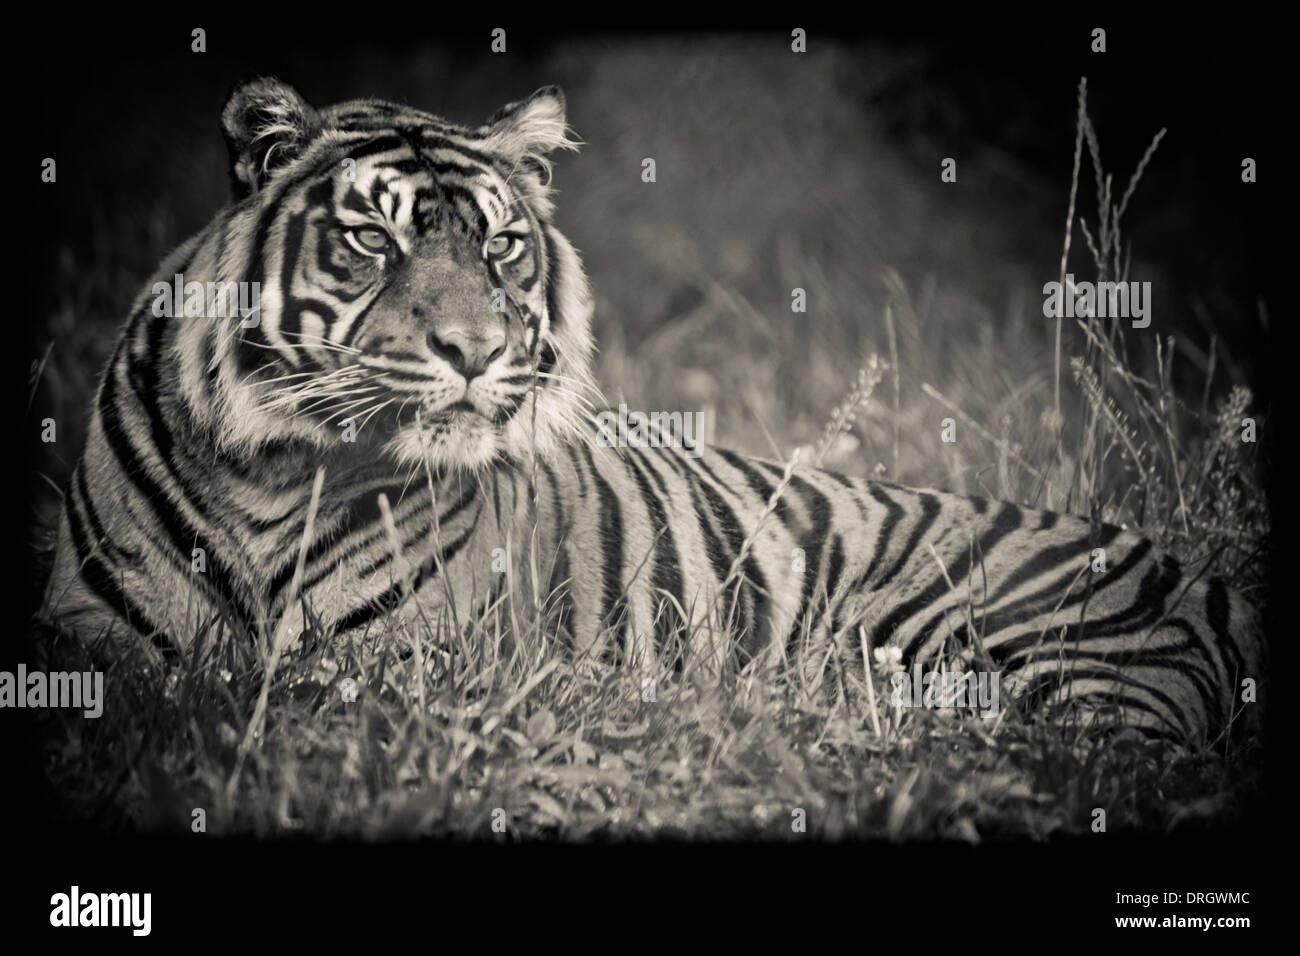 A tiger in the wild at a safari park, sitting waiting and watching Stock Photo